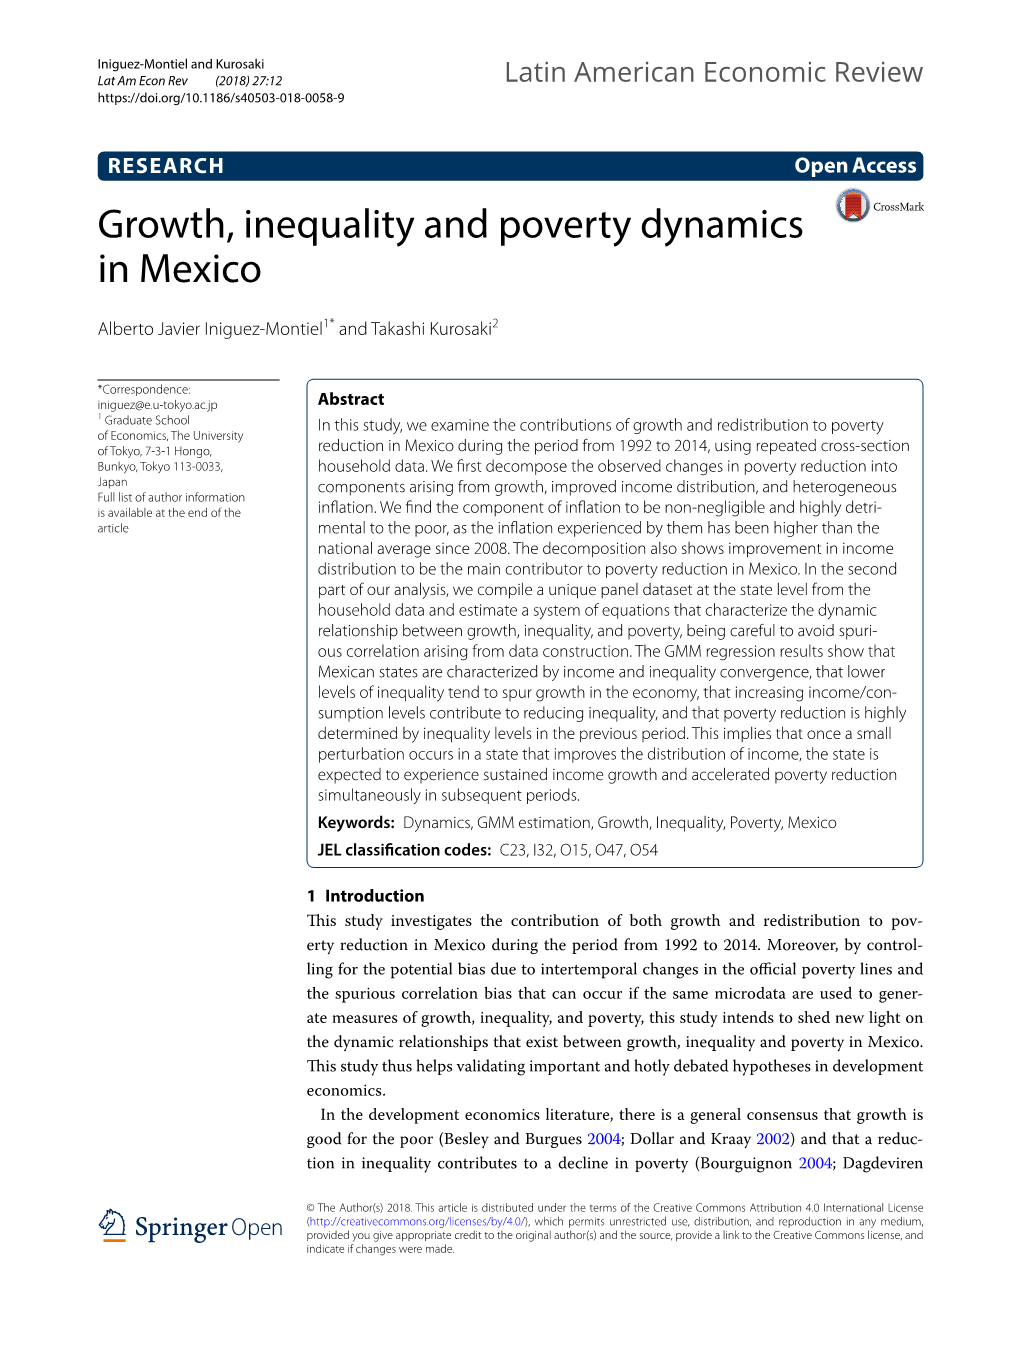 Growth, Inequality and Poverty Dynamics in Mexico